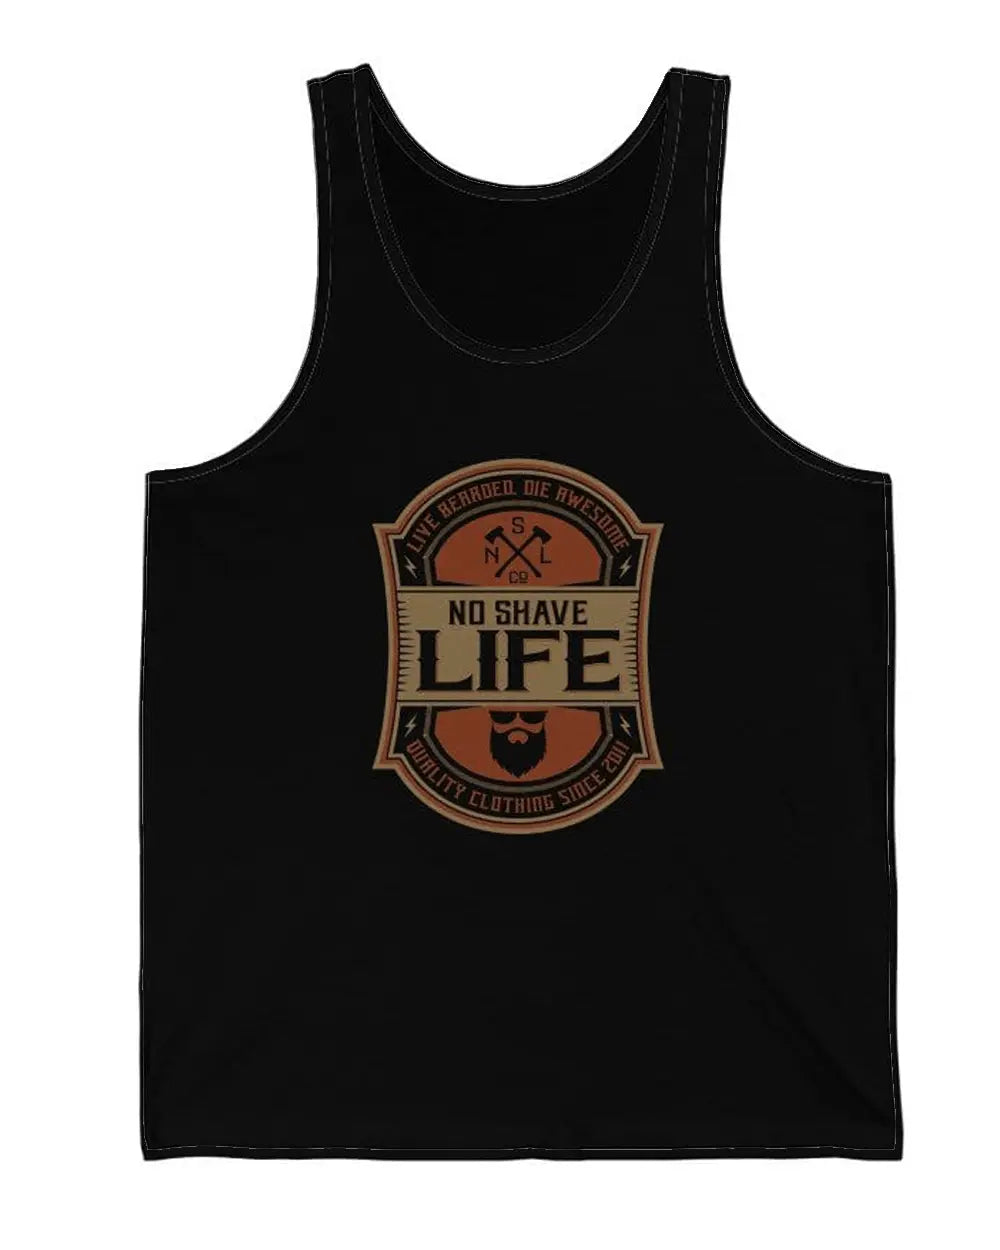 Live Bearded, Die Awesome Black Men's Tank Top